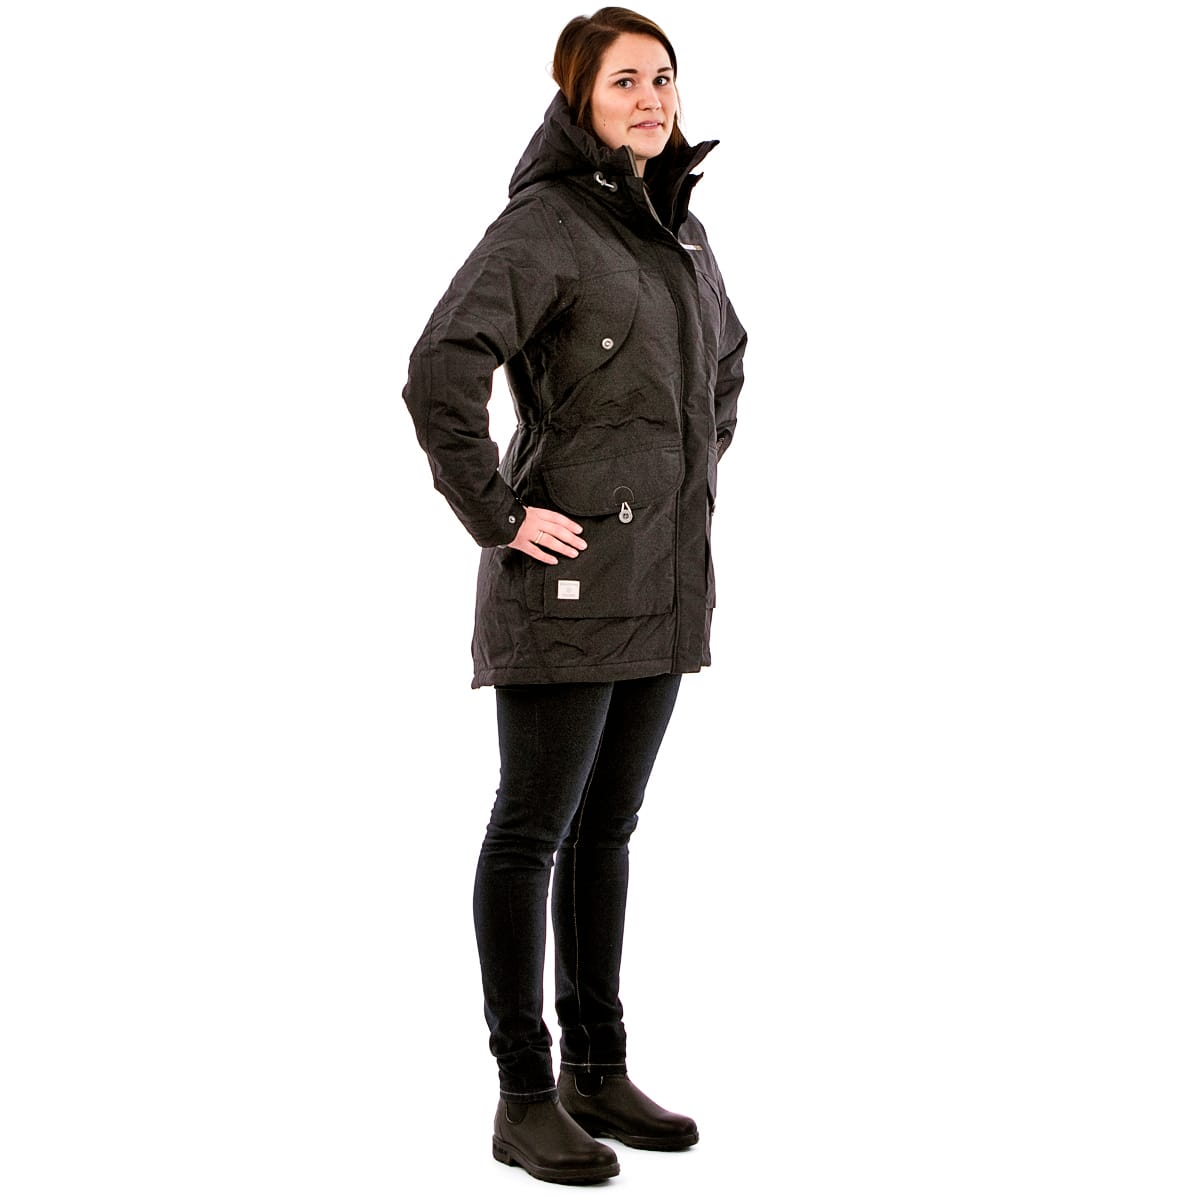 Buy Didriksons Veronica Women's Parka from Outnorth